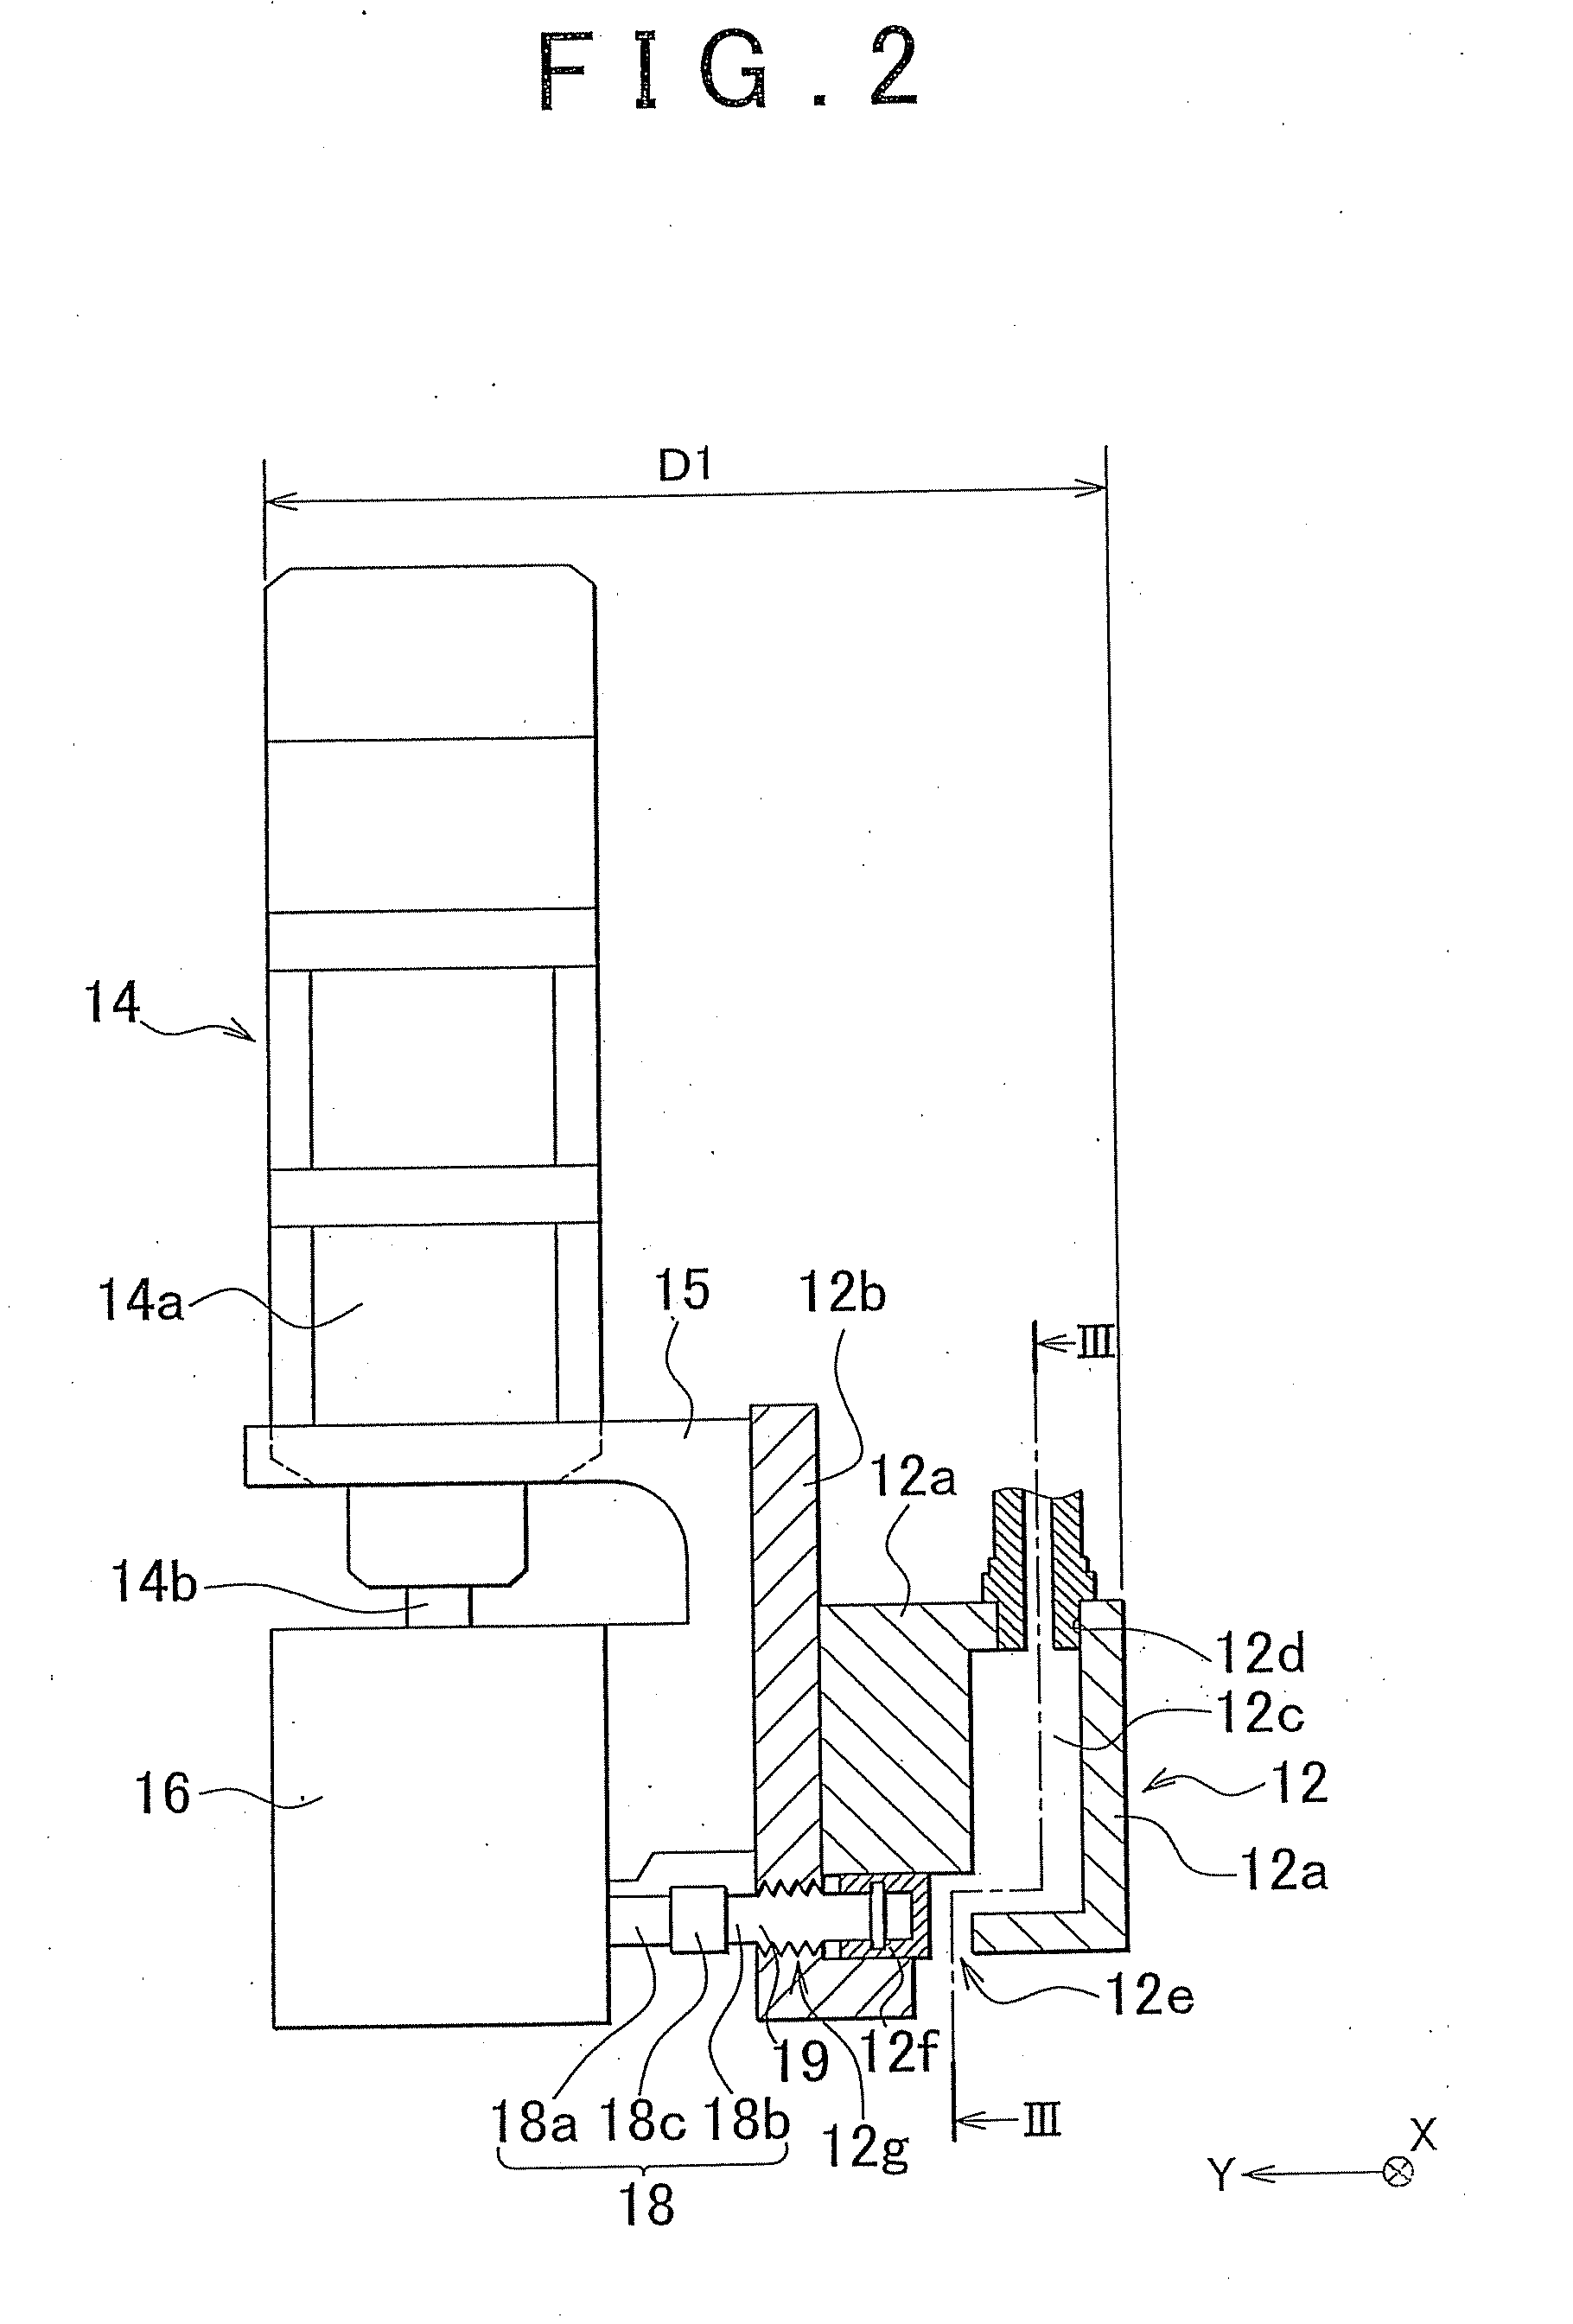 Nozzle unit for applying damping material, and damping material application apparatus